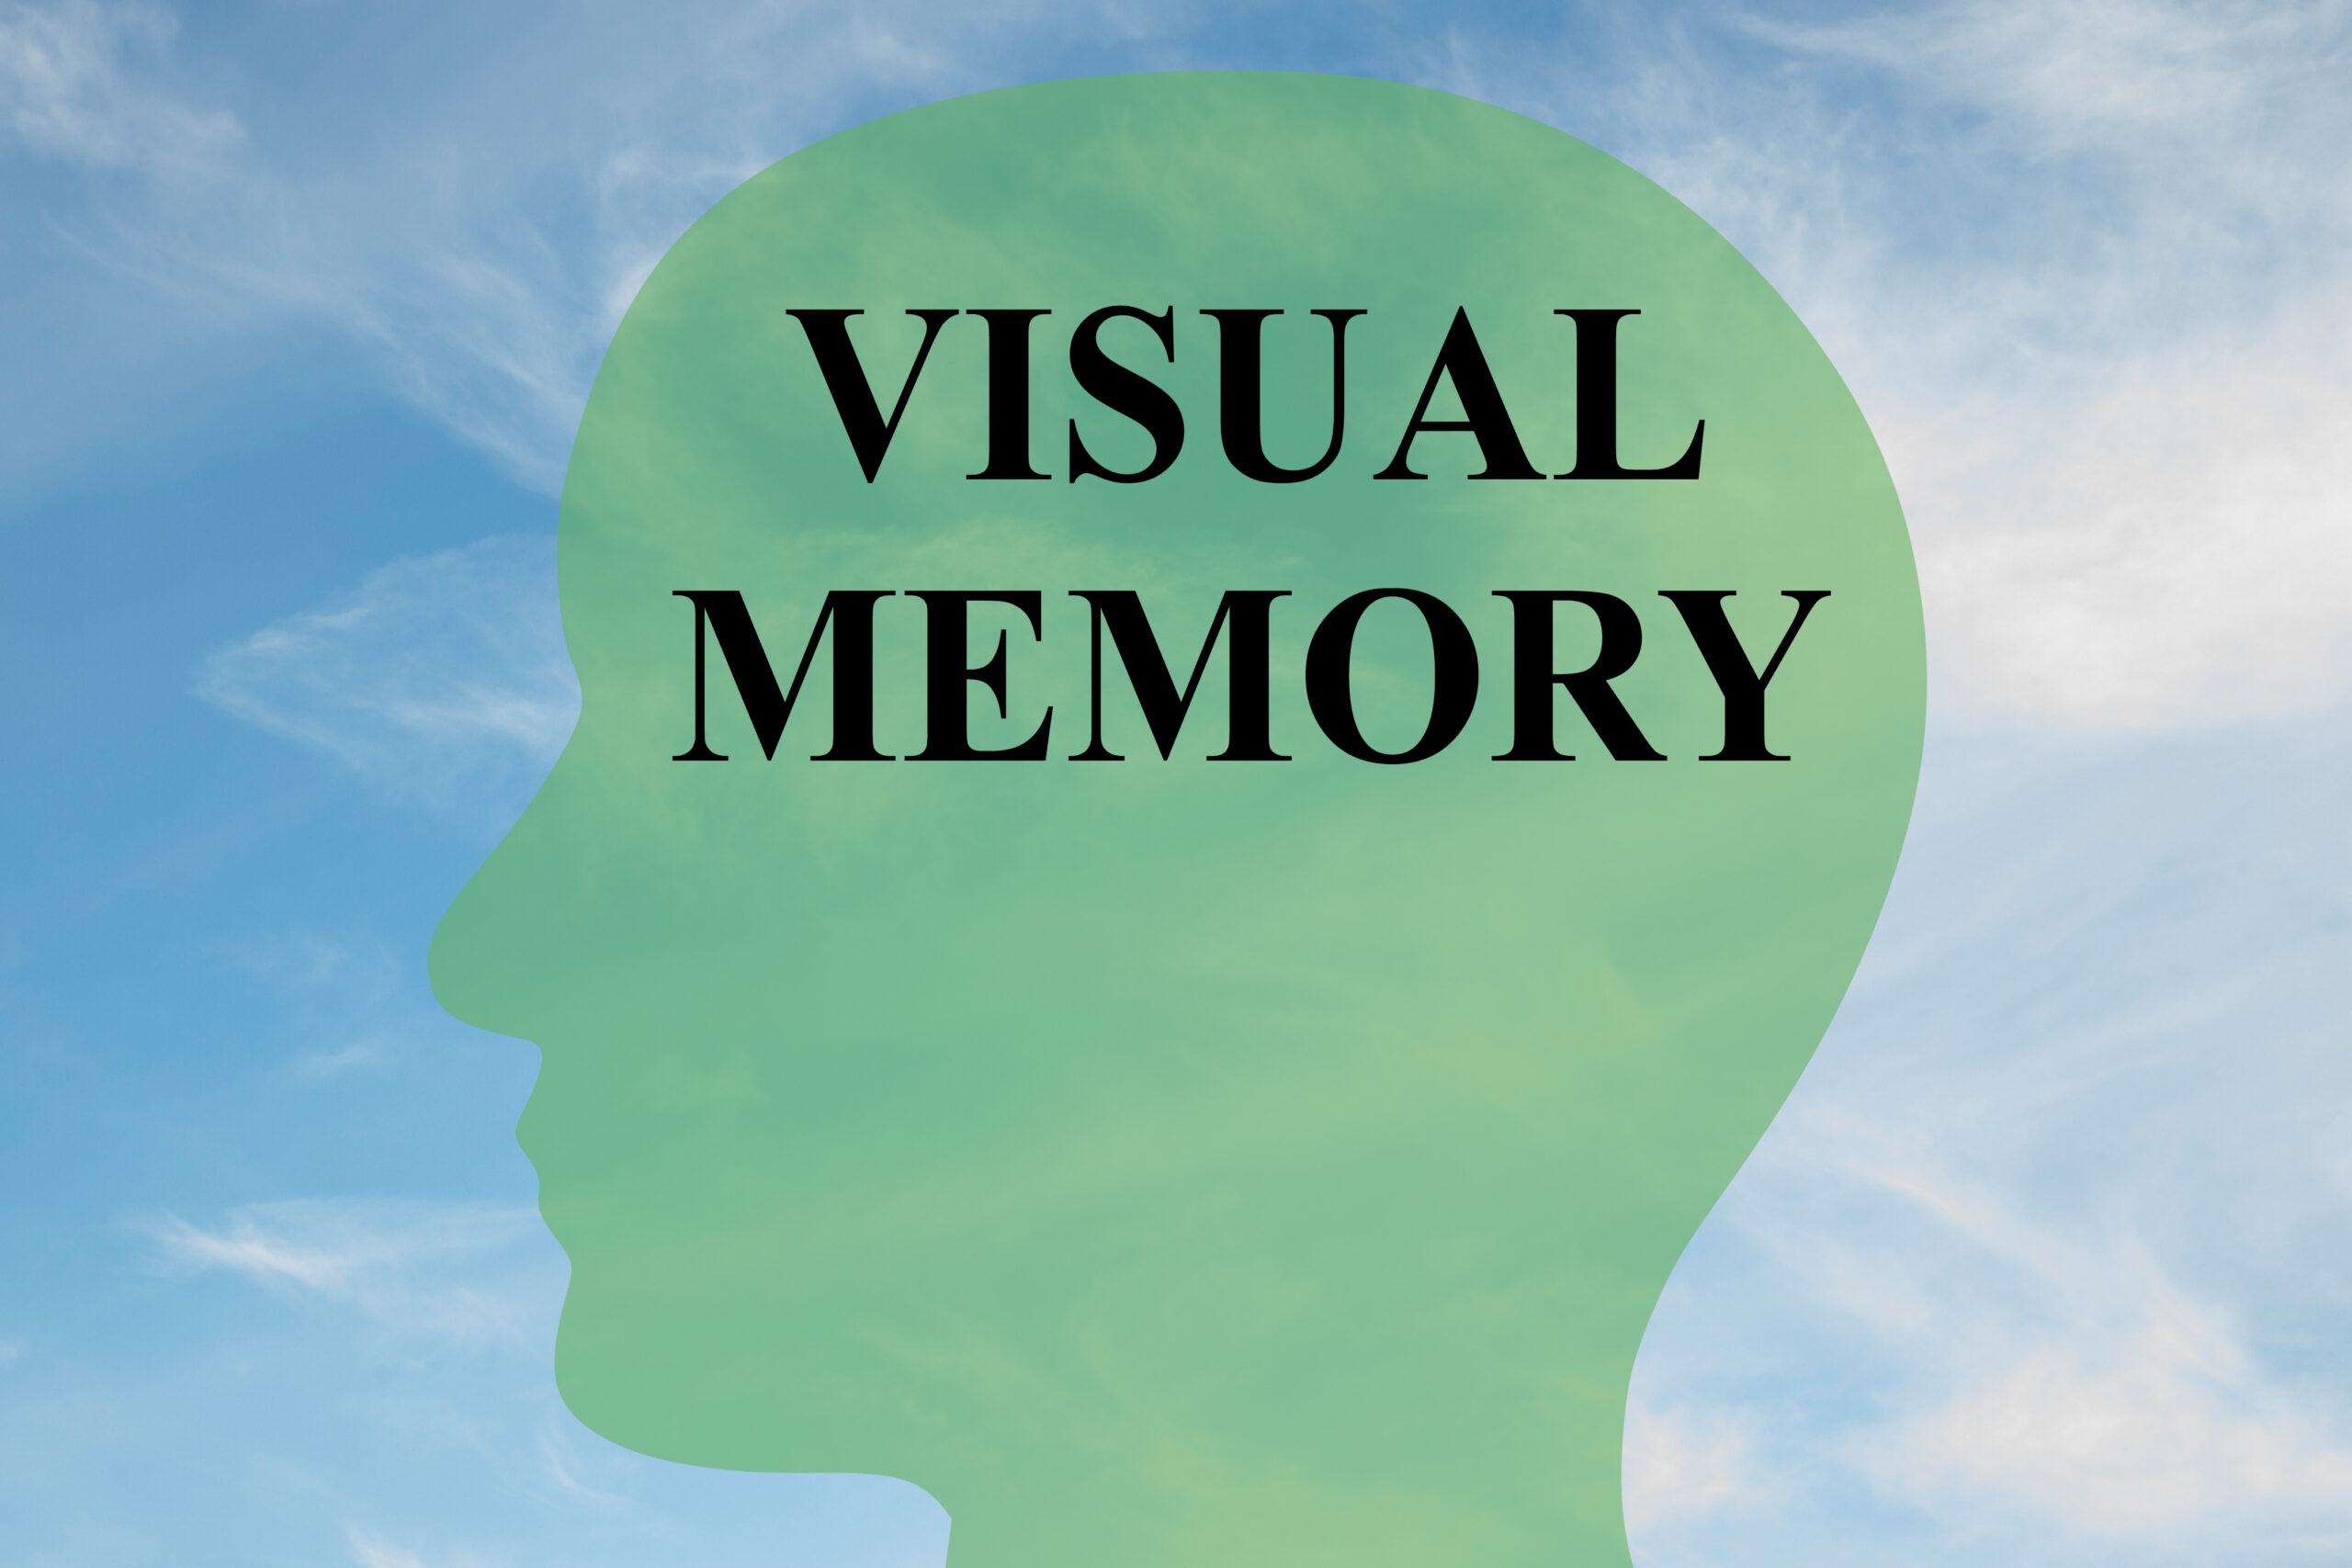 Visual Memory for Medical School - You See What You Want to See